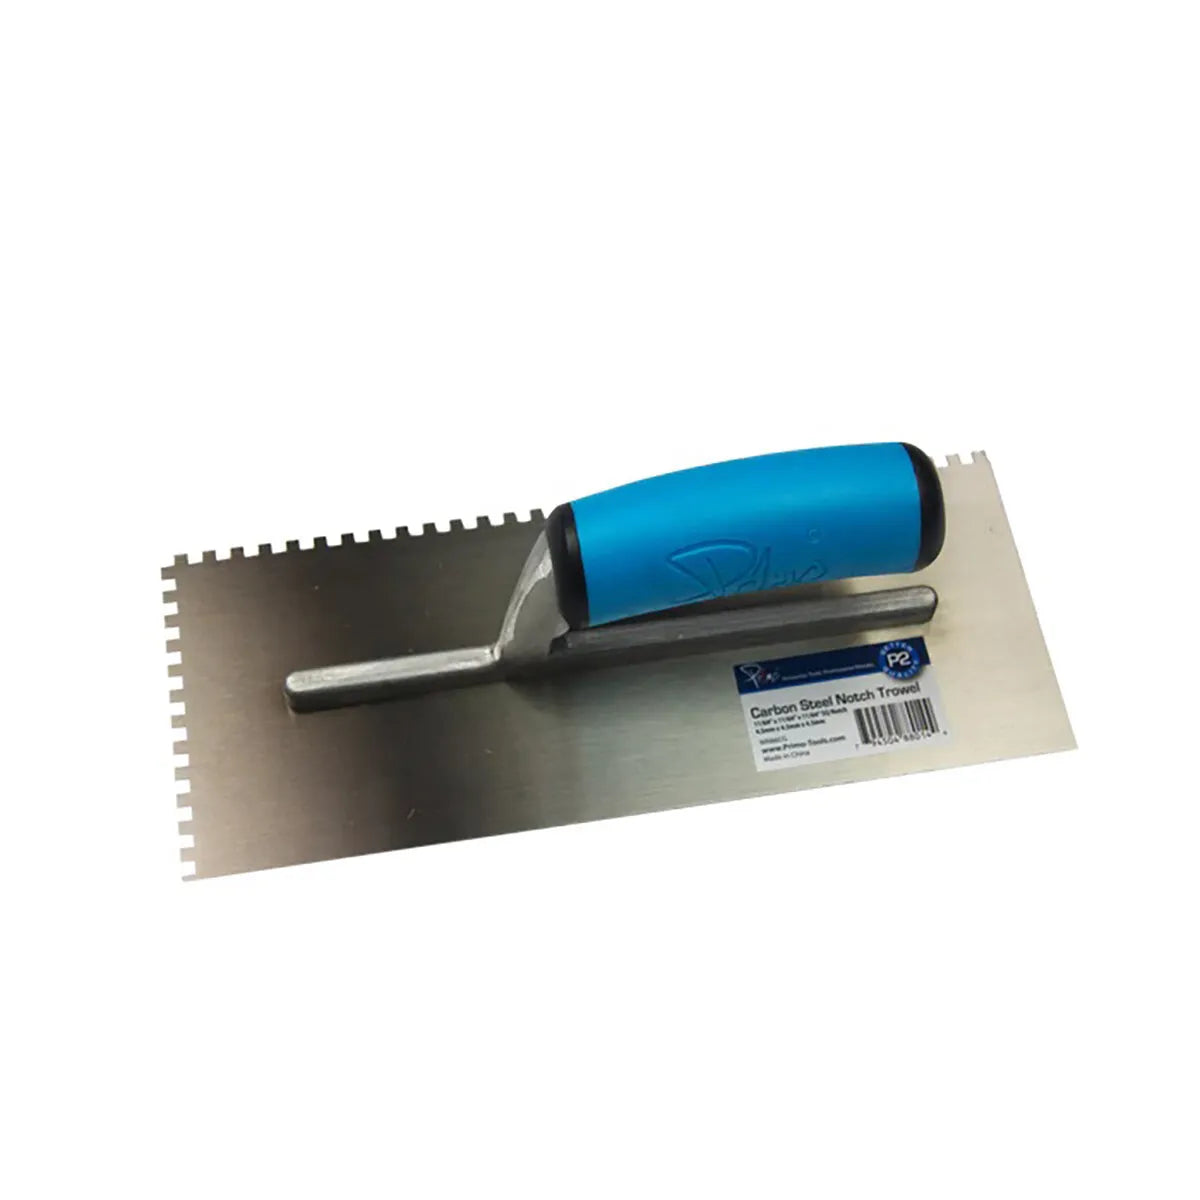 Primo Tools - Square Carbon Steel Notch Trowel